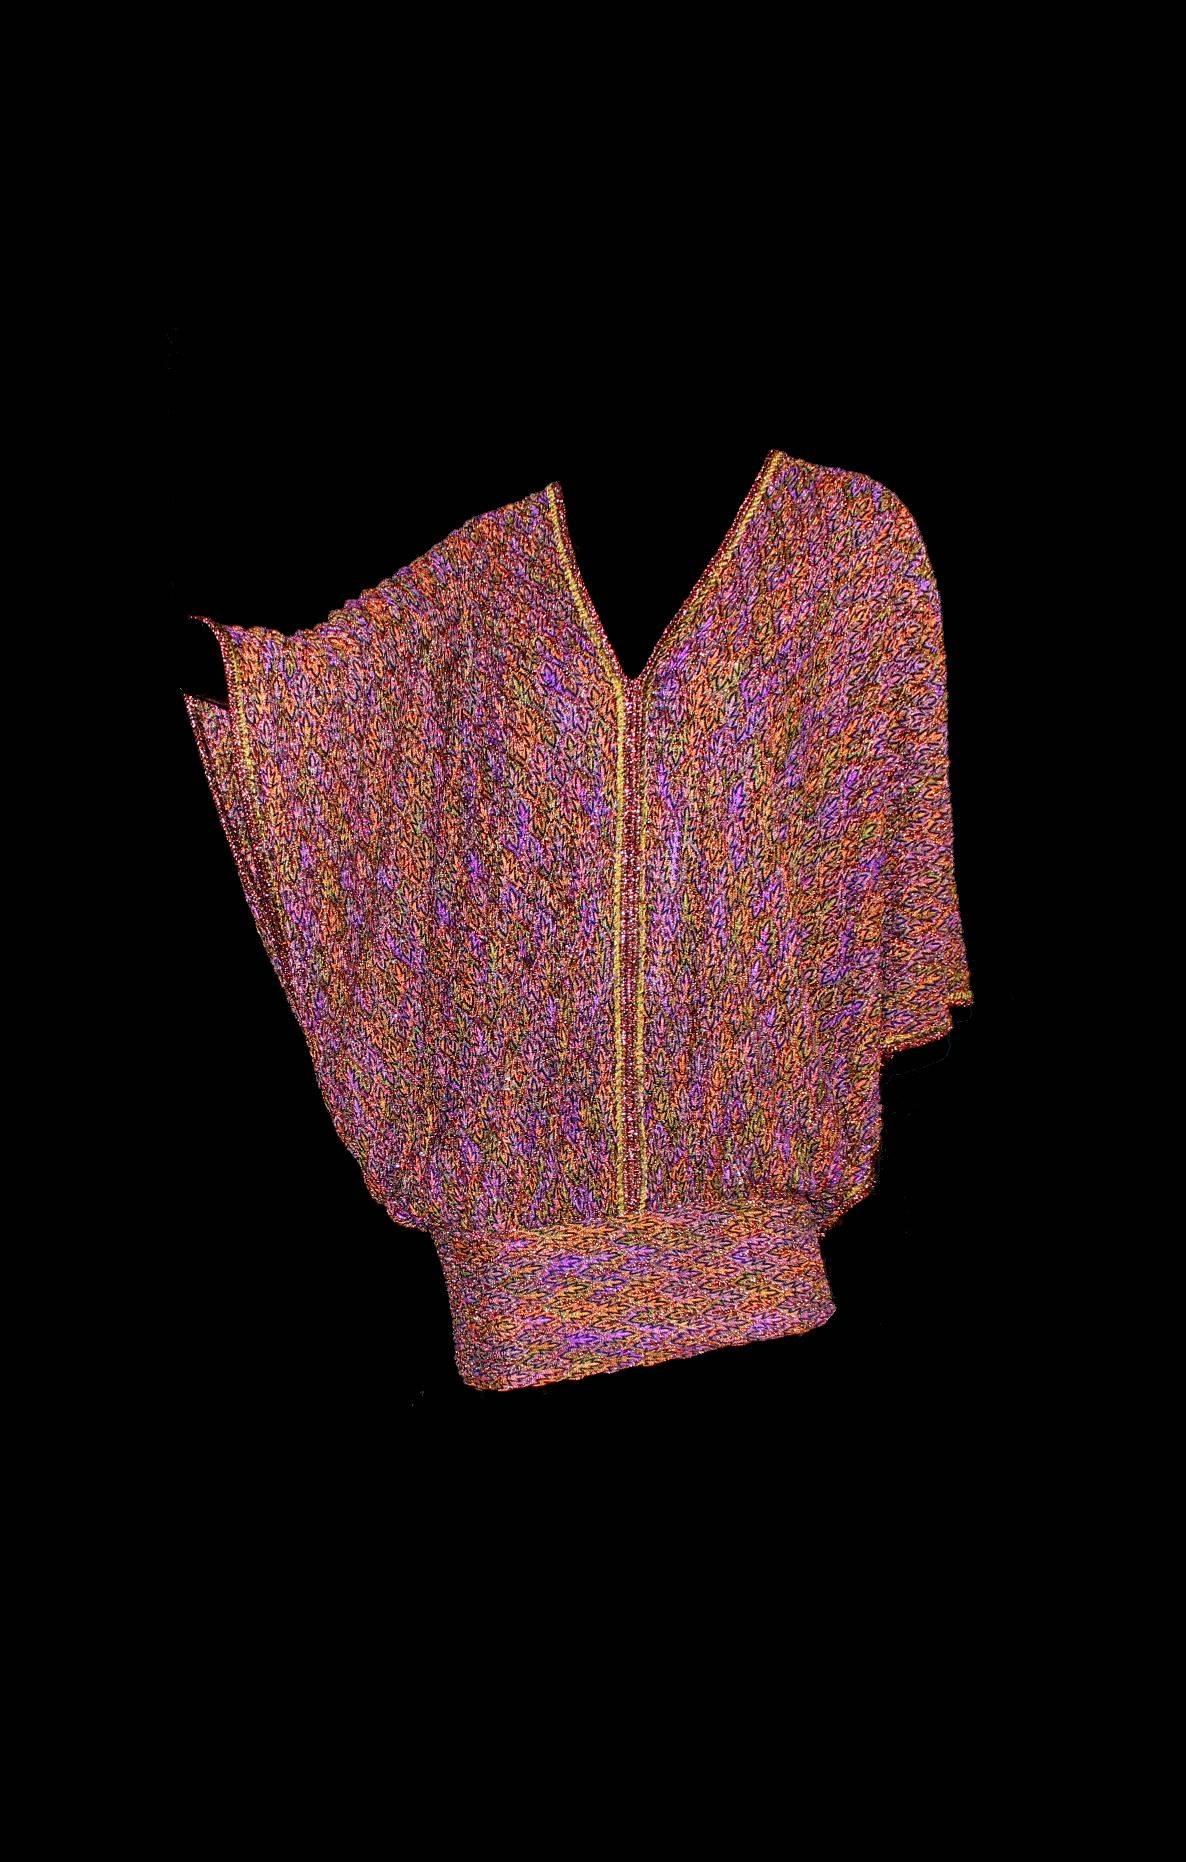 Beautiful multicolored lurex MISSONI kaftan dress
Classic MISSONI signature knit
Simply slips on
V-Neck
Batwing sleeves
Crochet-knit details - so beautiful!
Dry Clean only
Made in Italy
Size 44
